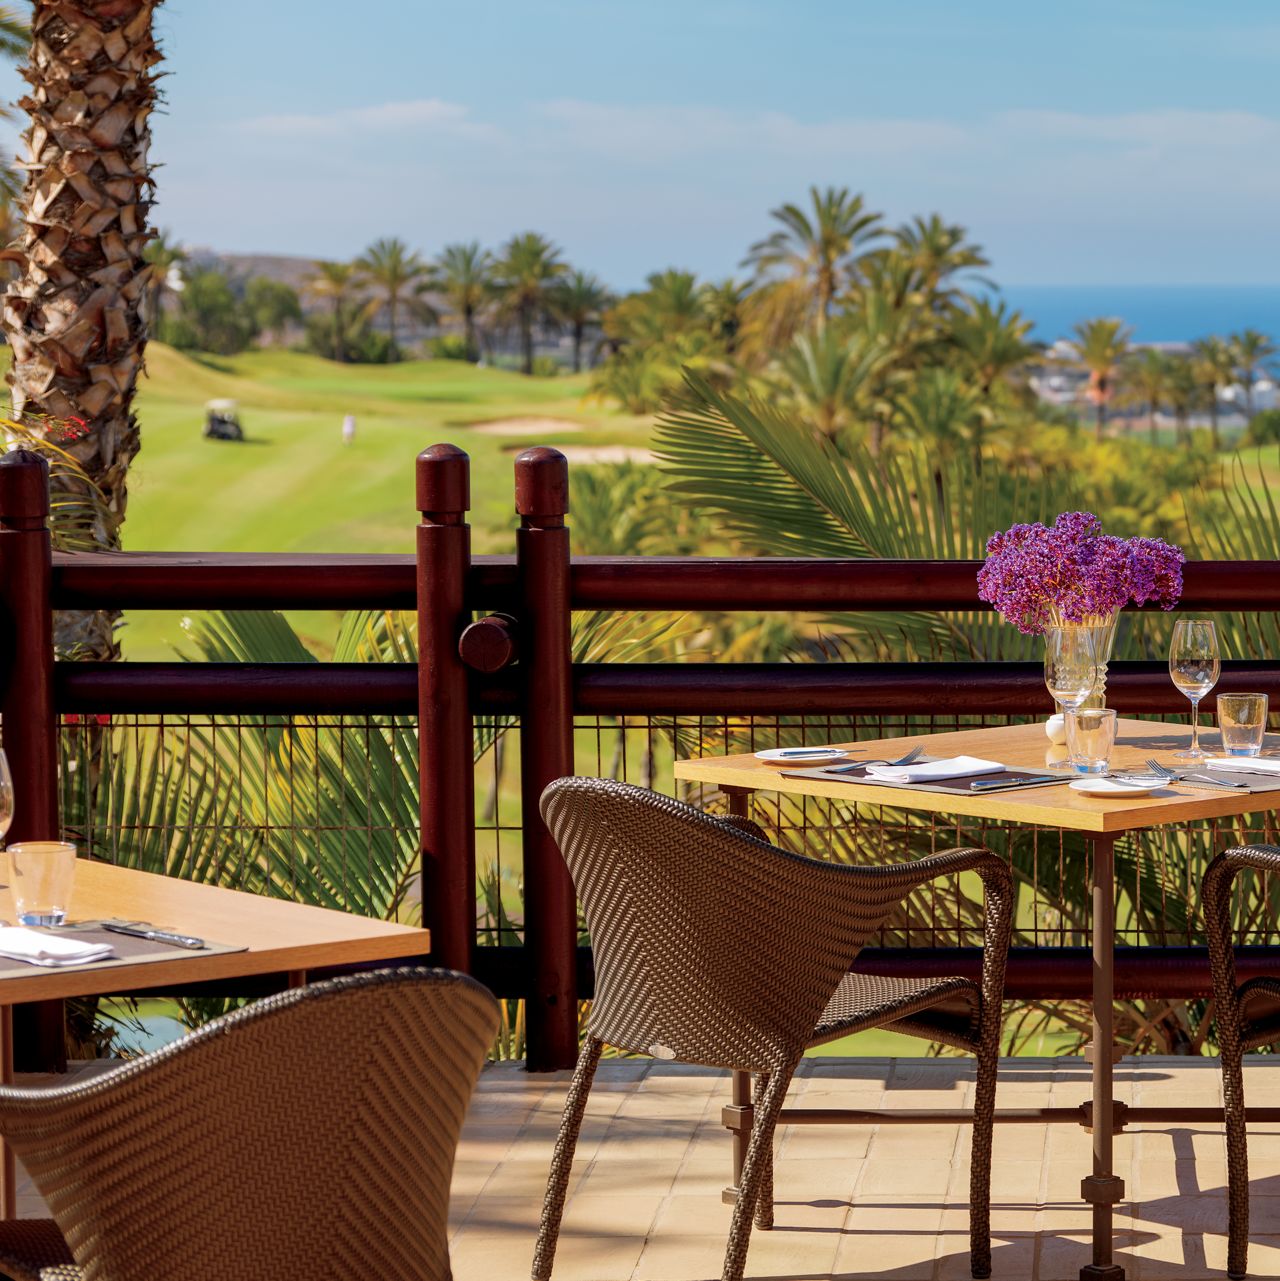 Dining tables on a patio overlooking a golf course and the ocean